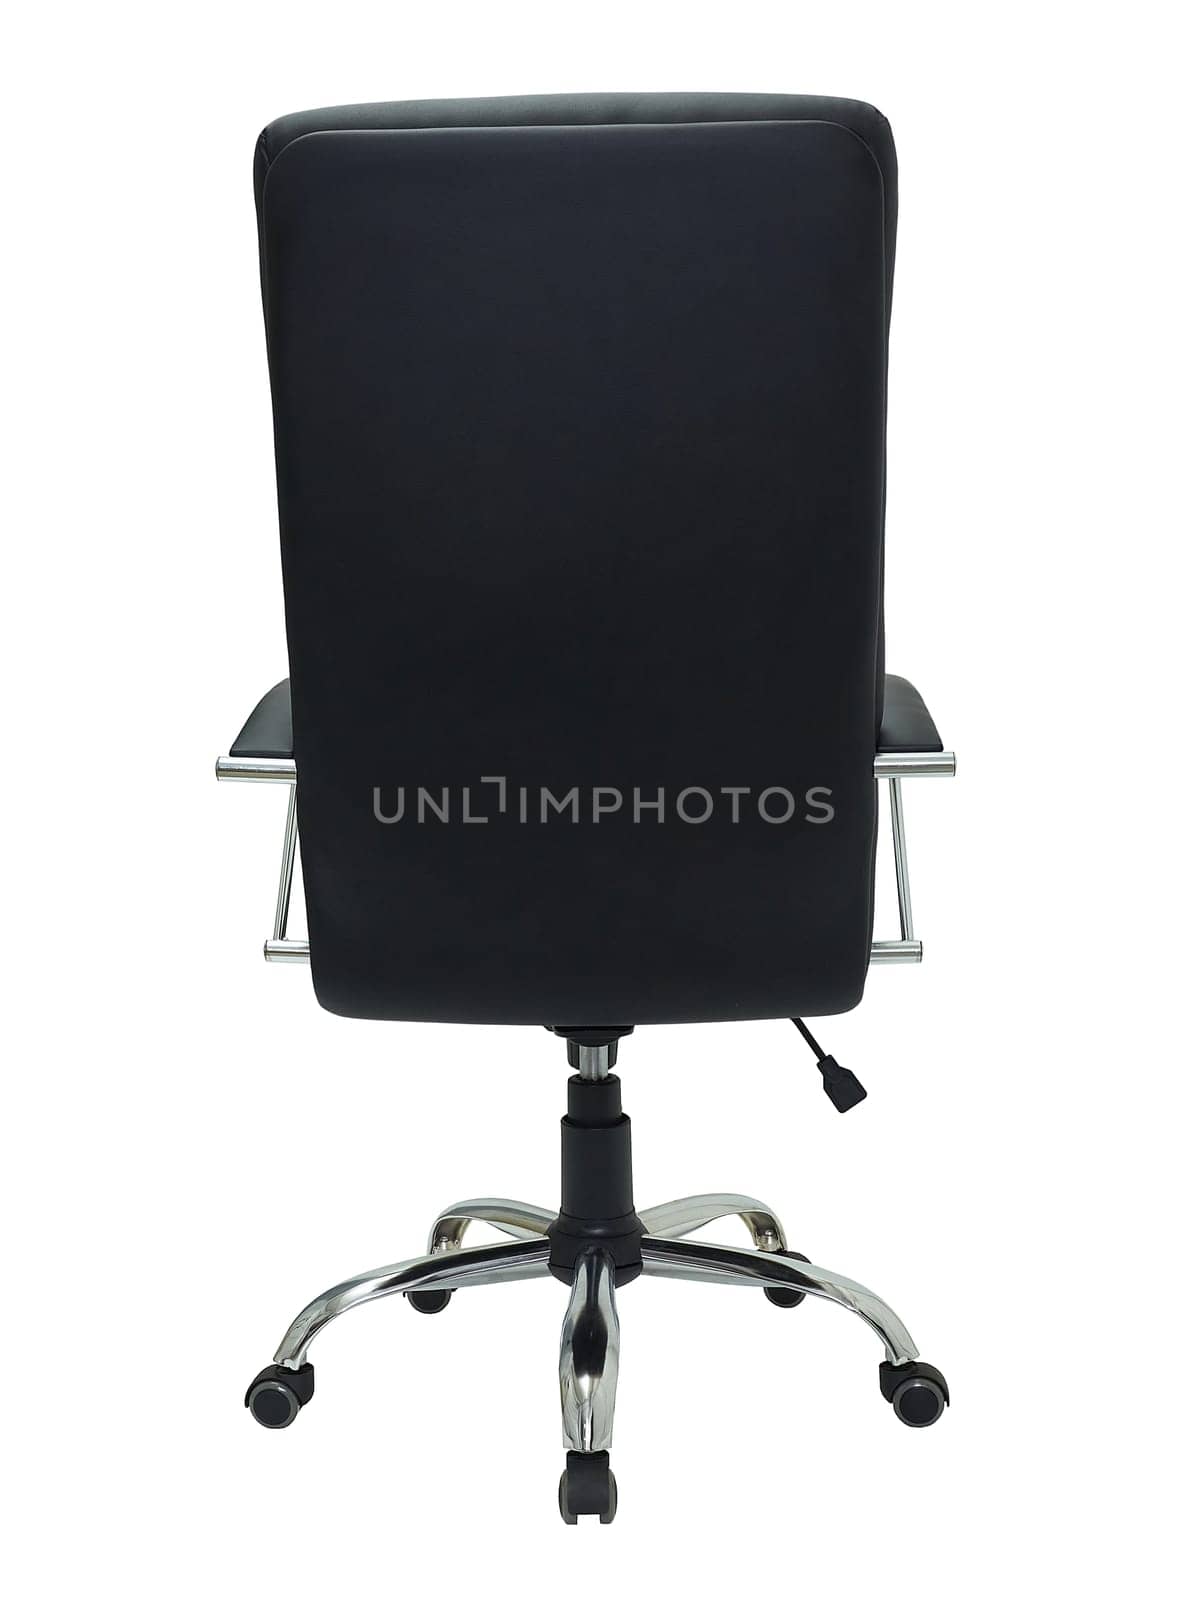 modern furniture in minimal style, interior, home design. black leather armchair on wheels isolated on white background, back view.